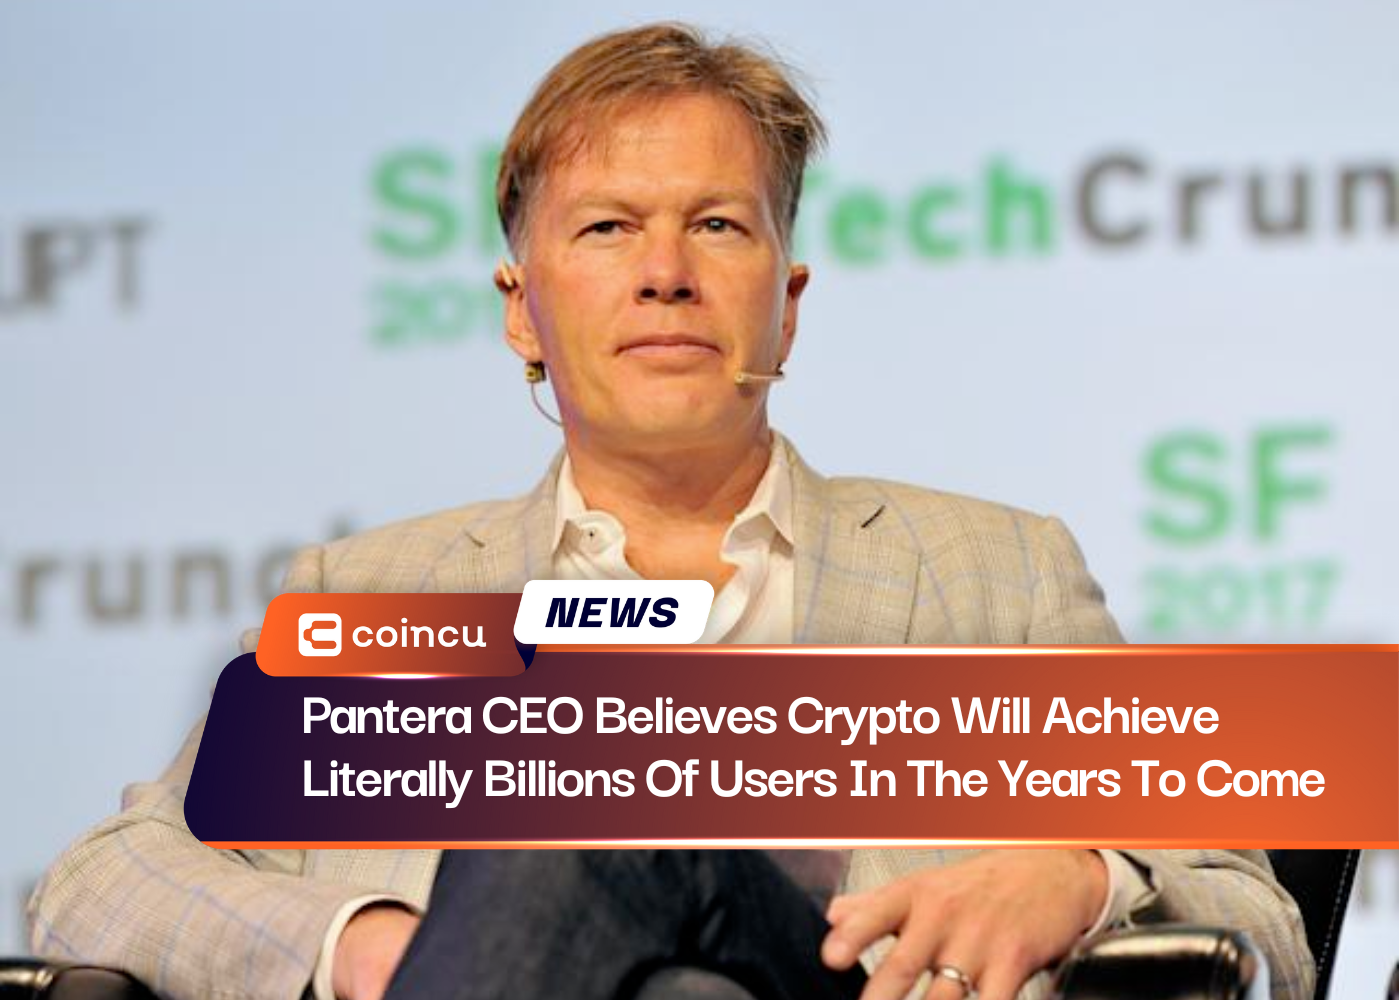 Pantera CEO Believes Crypto Will Achieve Literally Billions Of Users In The Years To Come